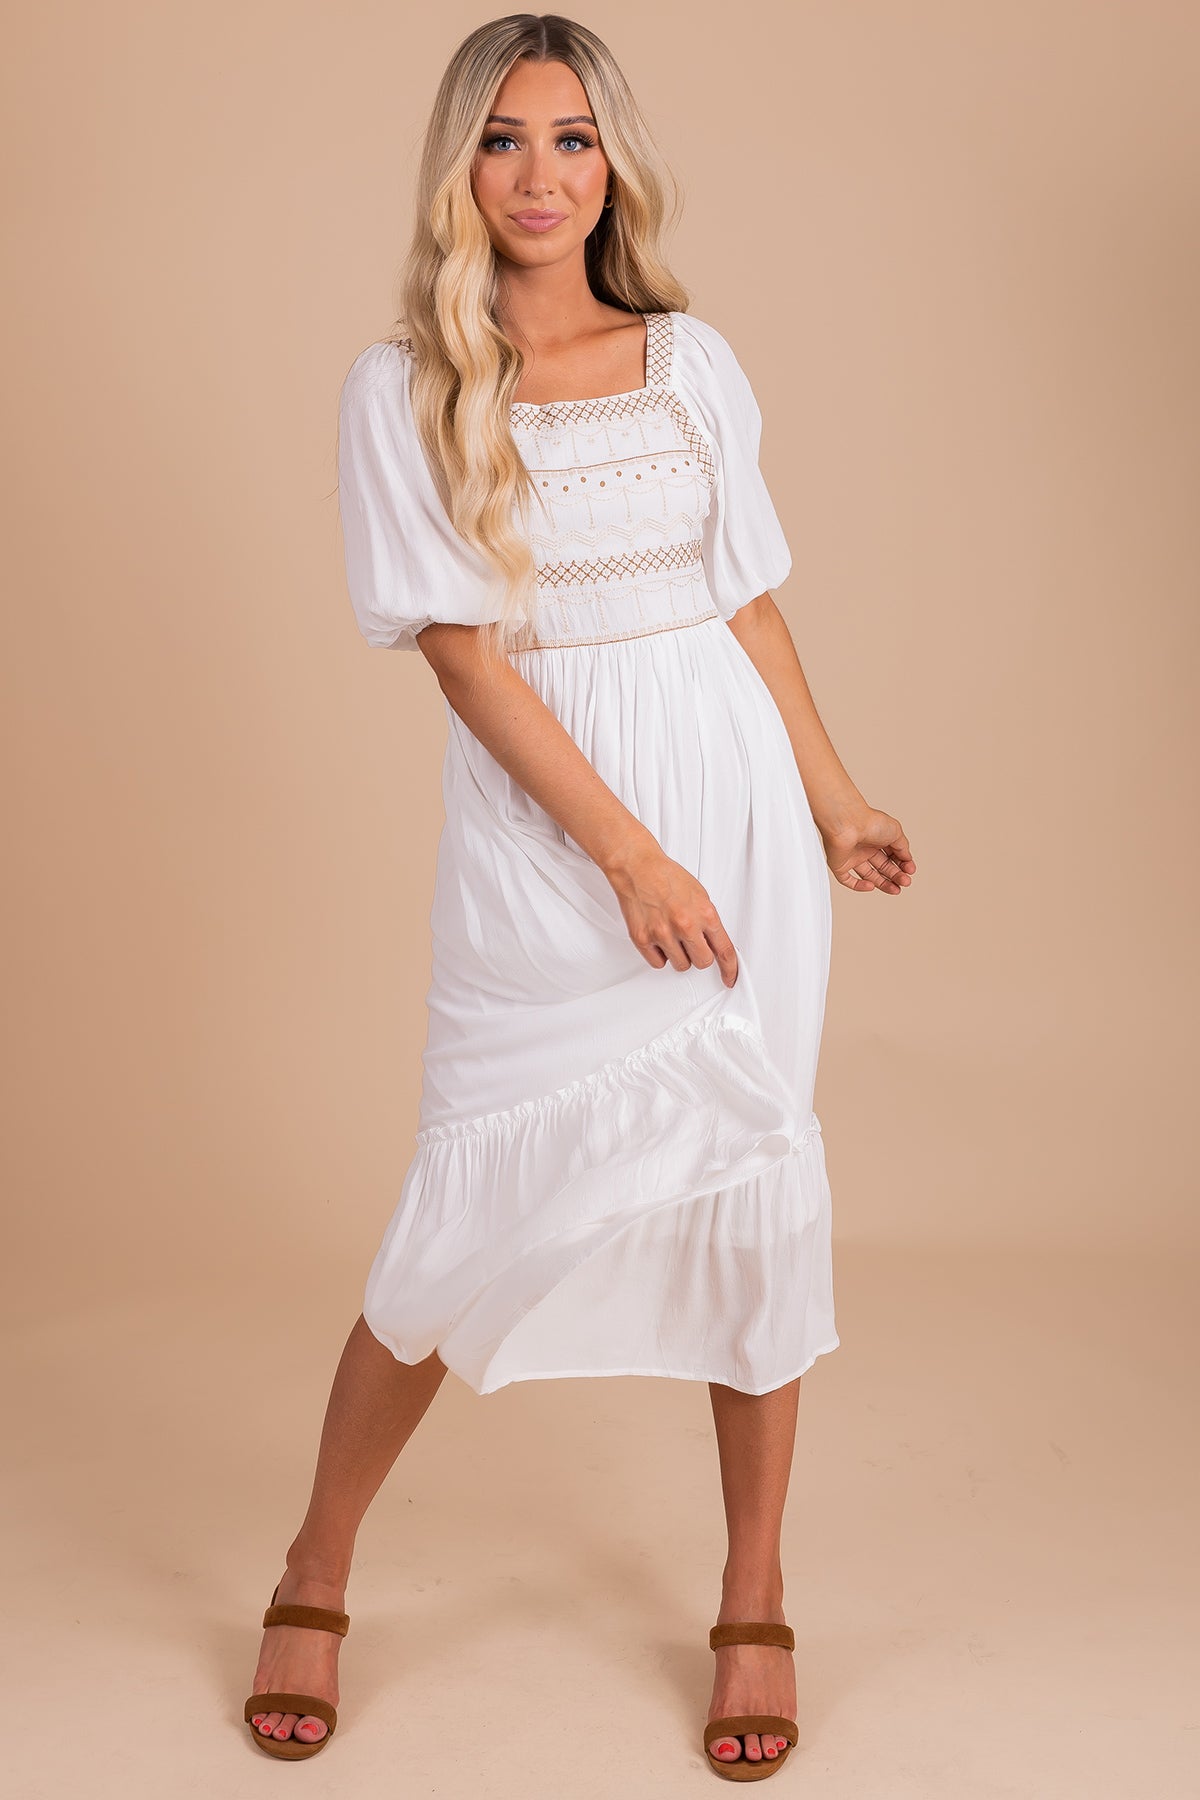 Women's White Dress with Embroidery and Square Neckline.